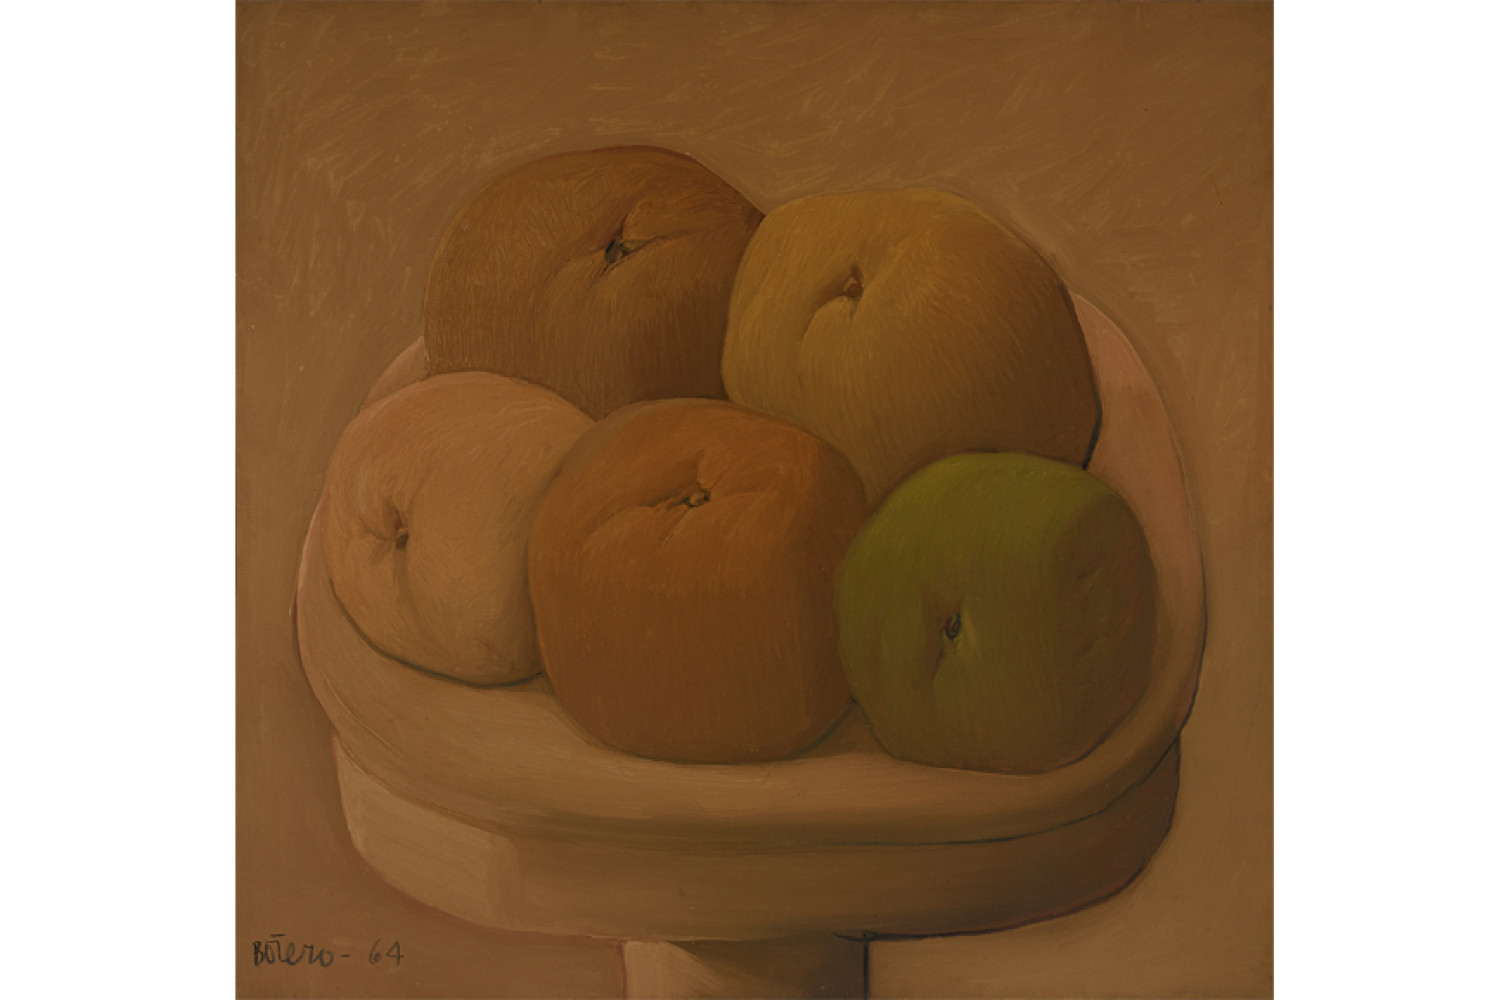 Las Frutas (The Fruits), 1964, by Fernando Botero (Colombian, b. 1932); Oil on canvas; 50 3/4 x 52 1/8 inches; Courtesy of the Lowe Art Museum, University of Miami. © 1964 Fernando Botero.